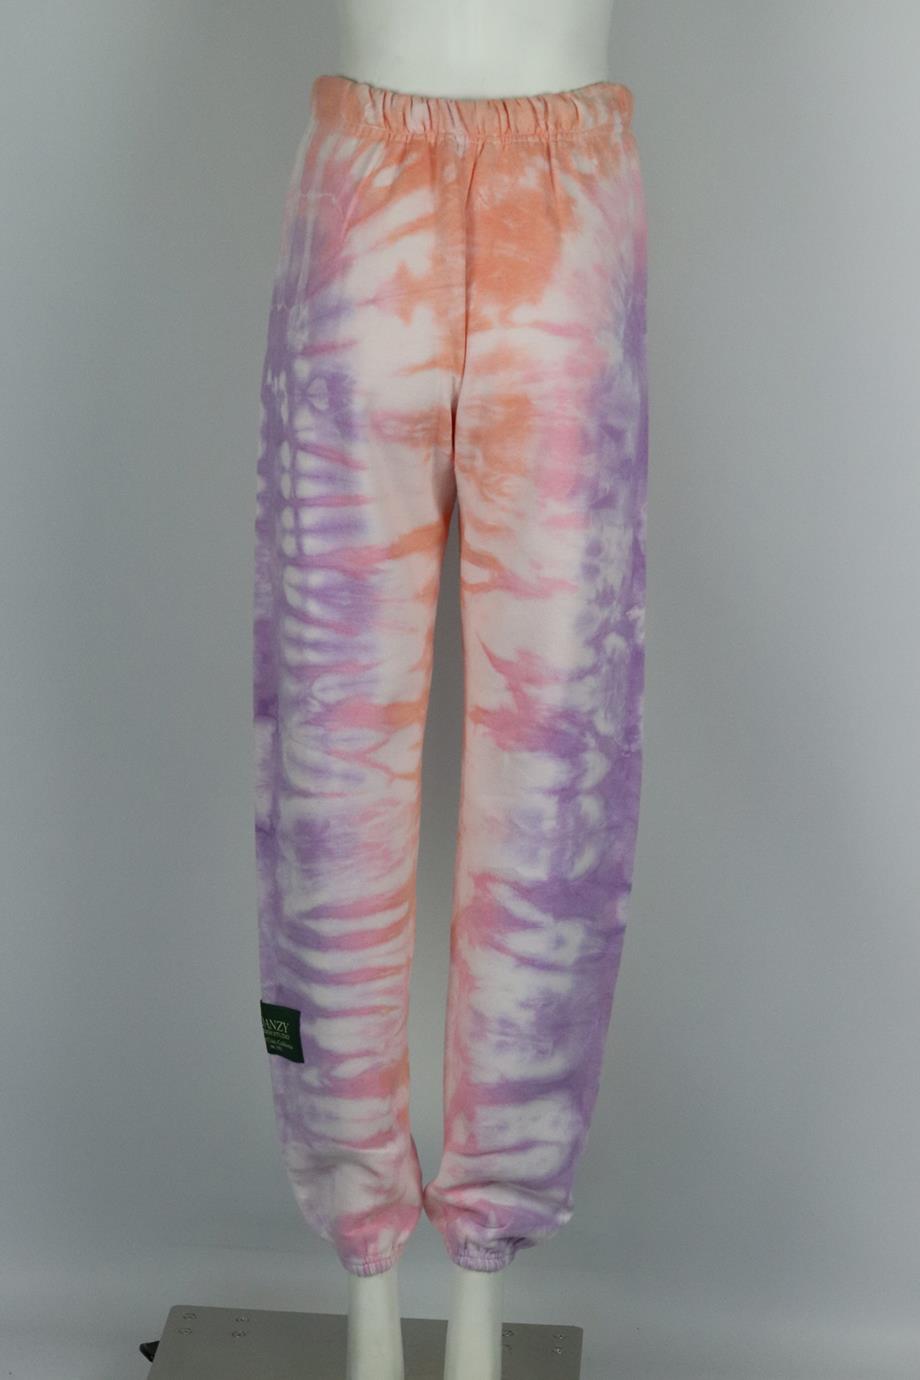 DANZY TIE DYED COTTON JERSEY TRACK PANTS SMALL